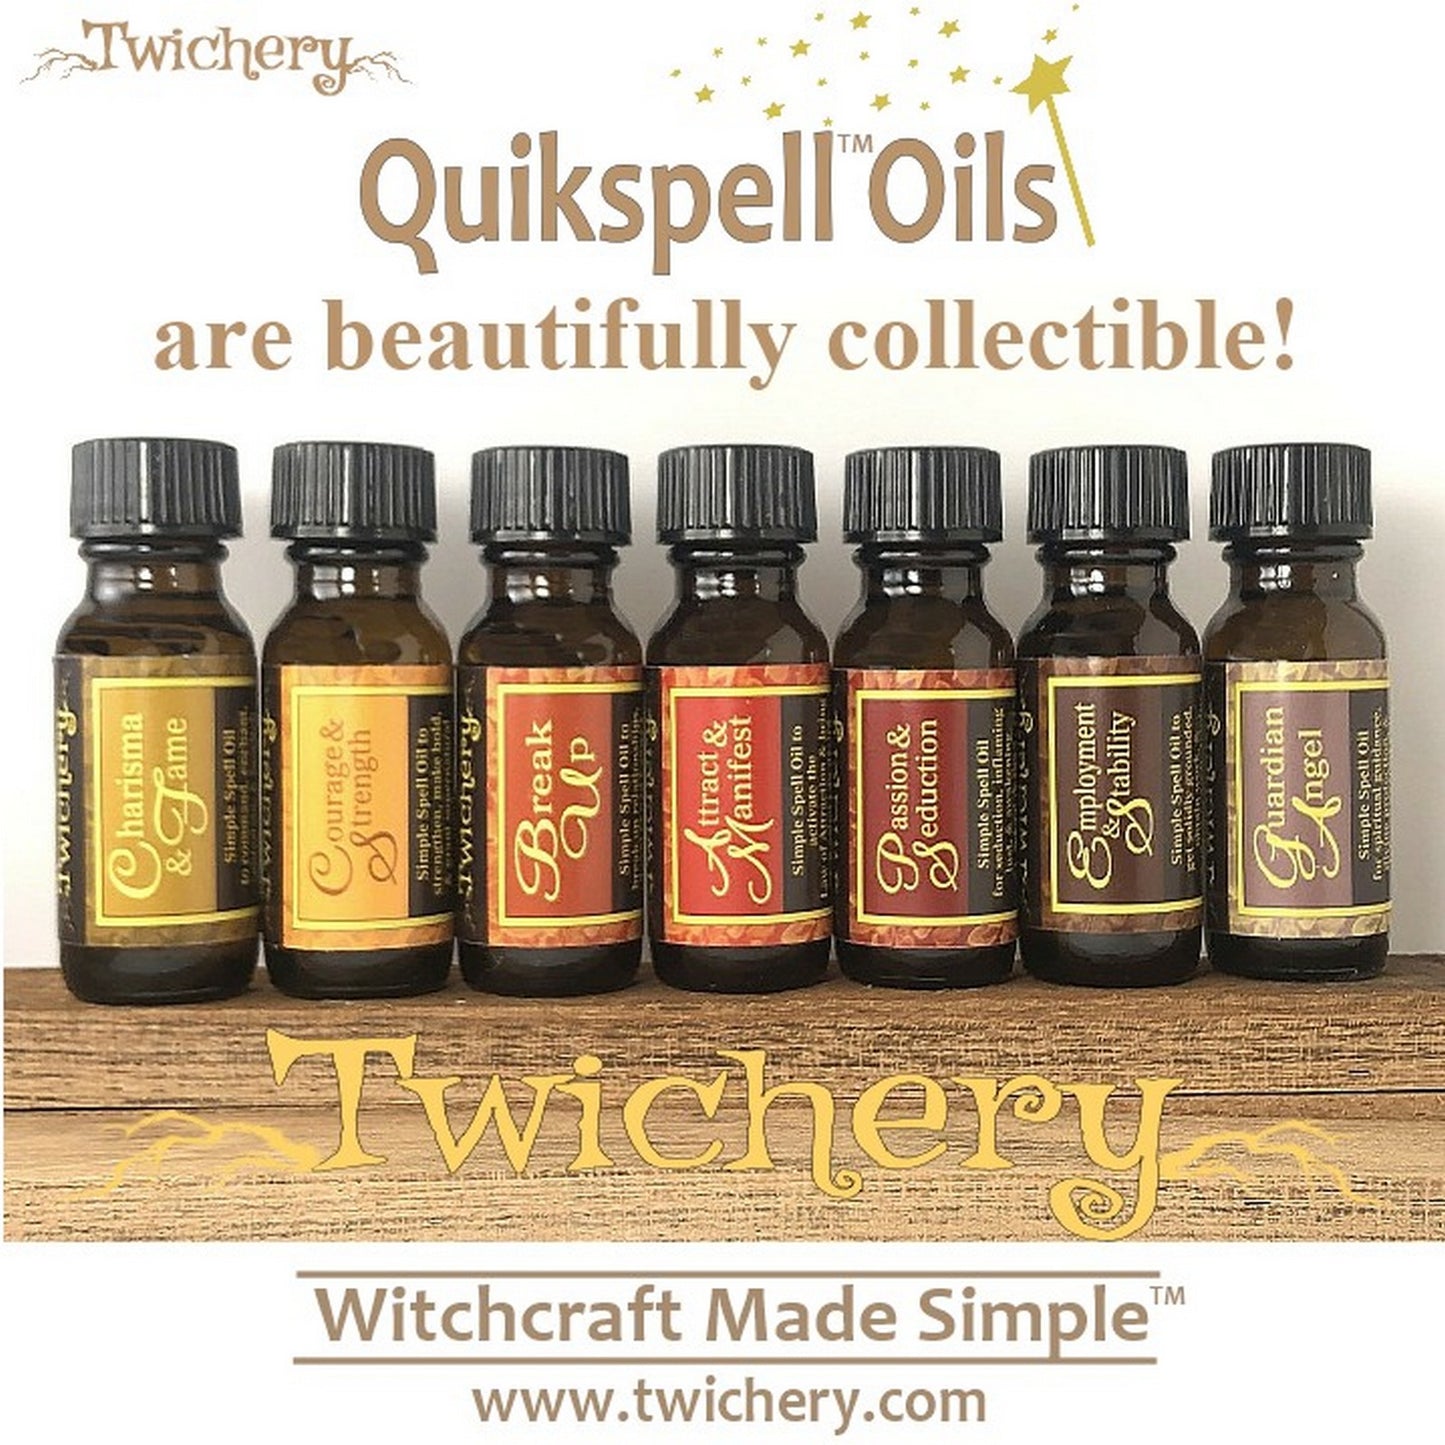 Collect all 24 Twichery Quikspell Oils for all your magickal needs. Hoodoo, Voodoo, Wicca, Witchcraft Made Simple